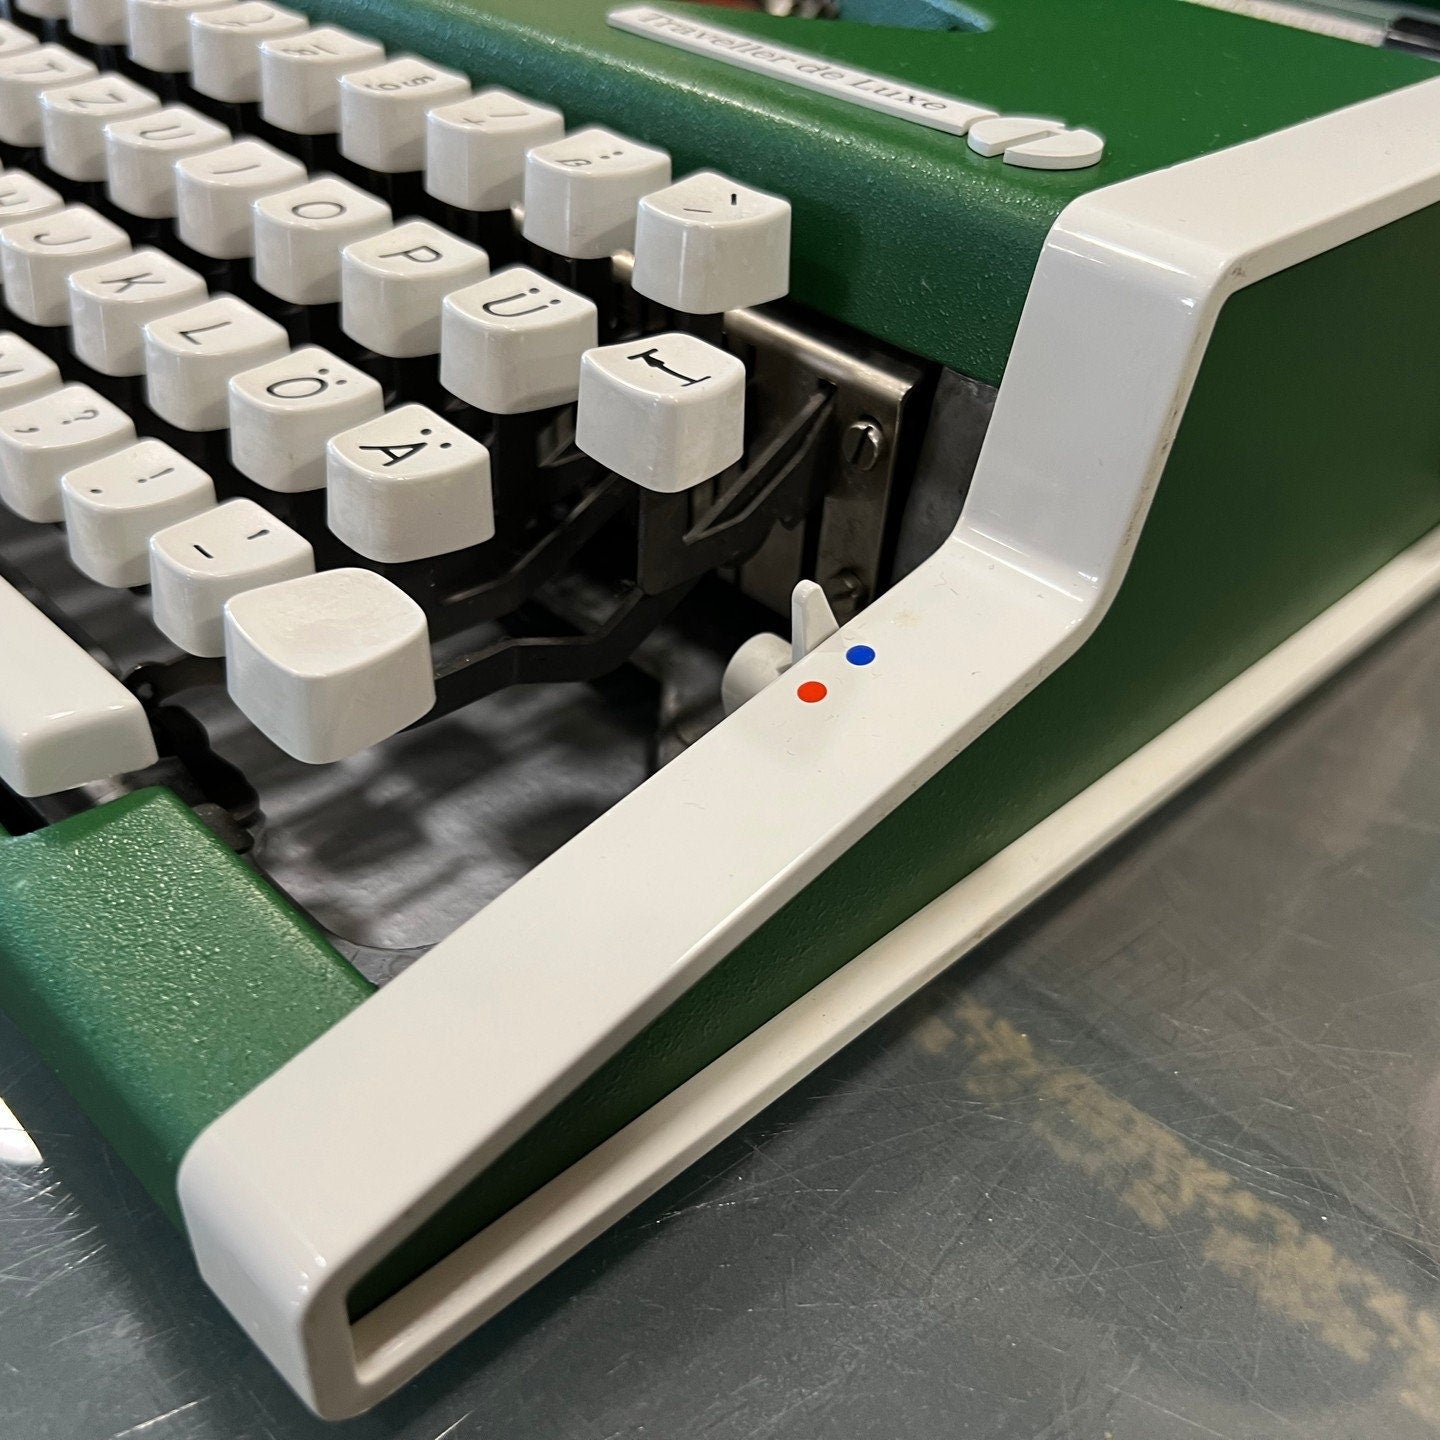 Olympia Traveller Deluxe Typewriter - Collectible White Keyboard - QWERTZ Layout - Includes Stylish Green Bag